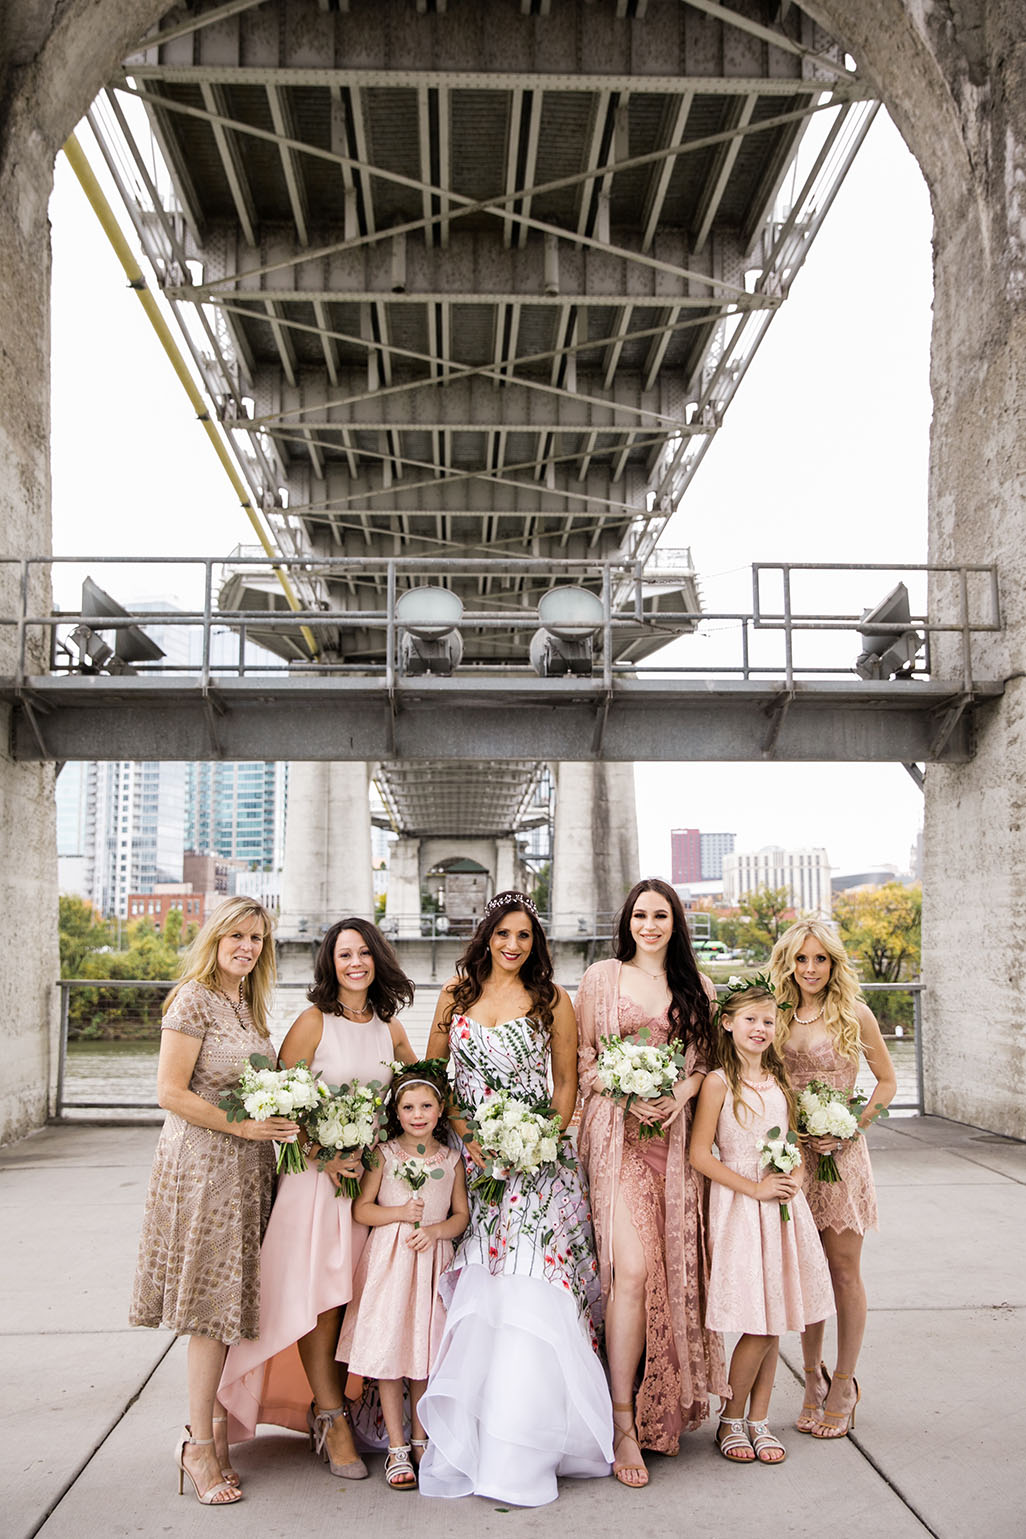 Tammy with Bridesmaids